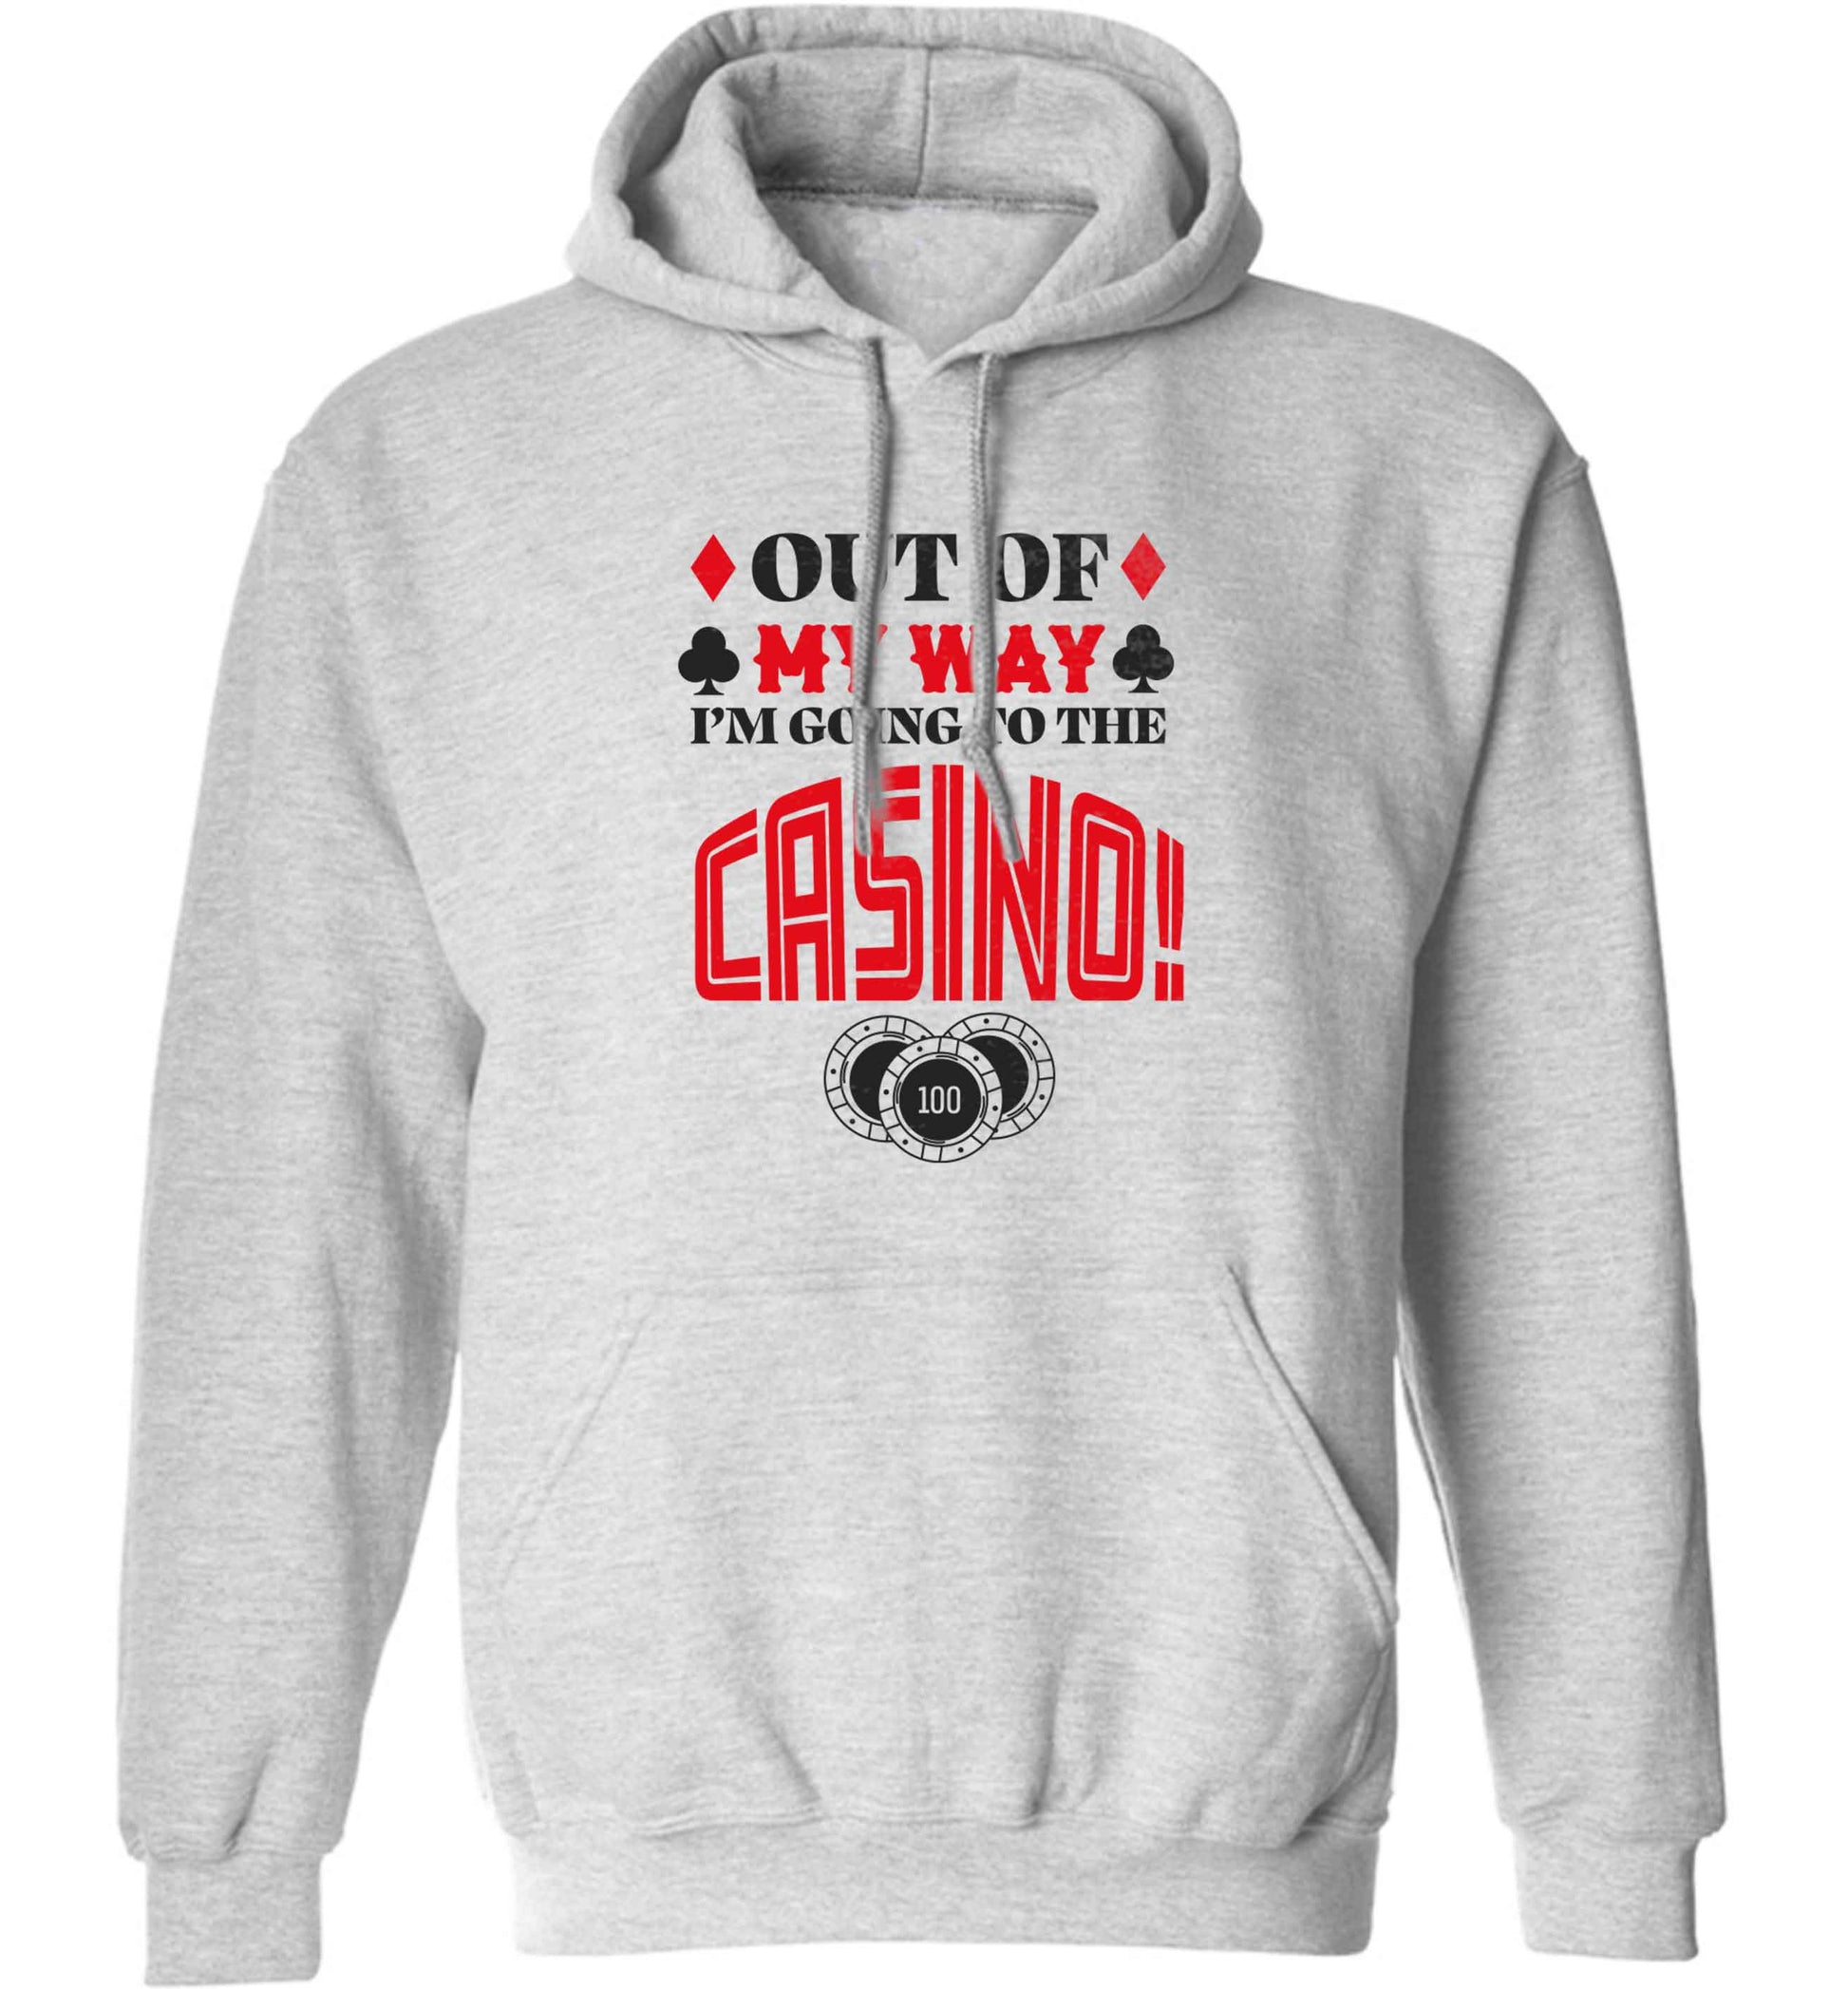 Out of my way I'm going to the casino adults unisex grey hoodie 2XL